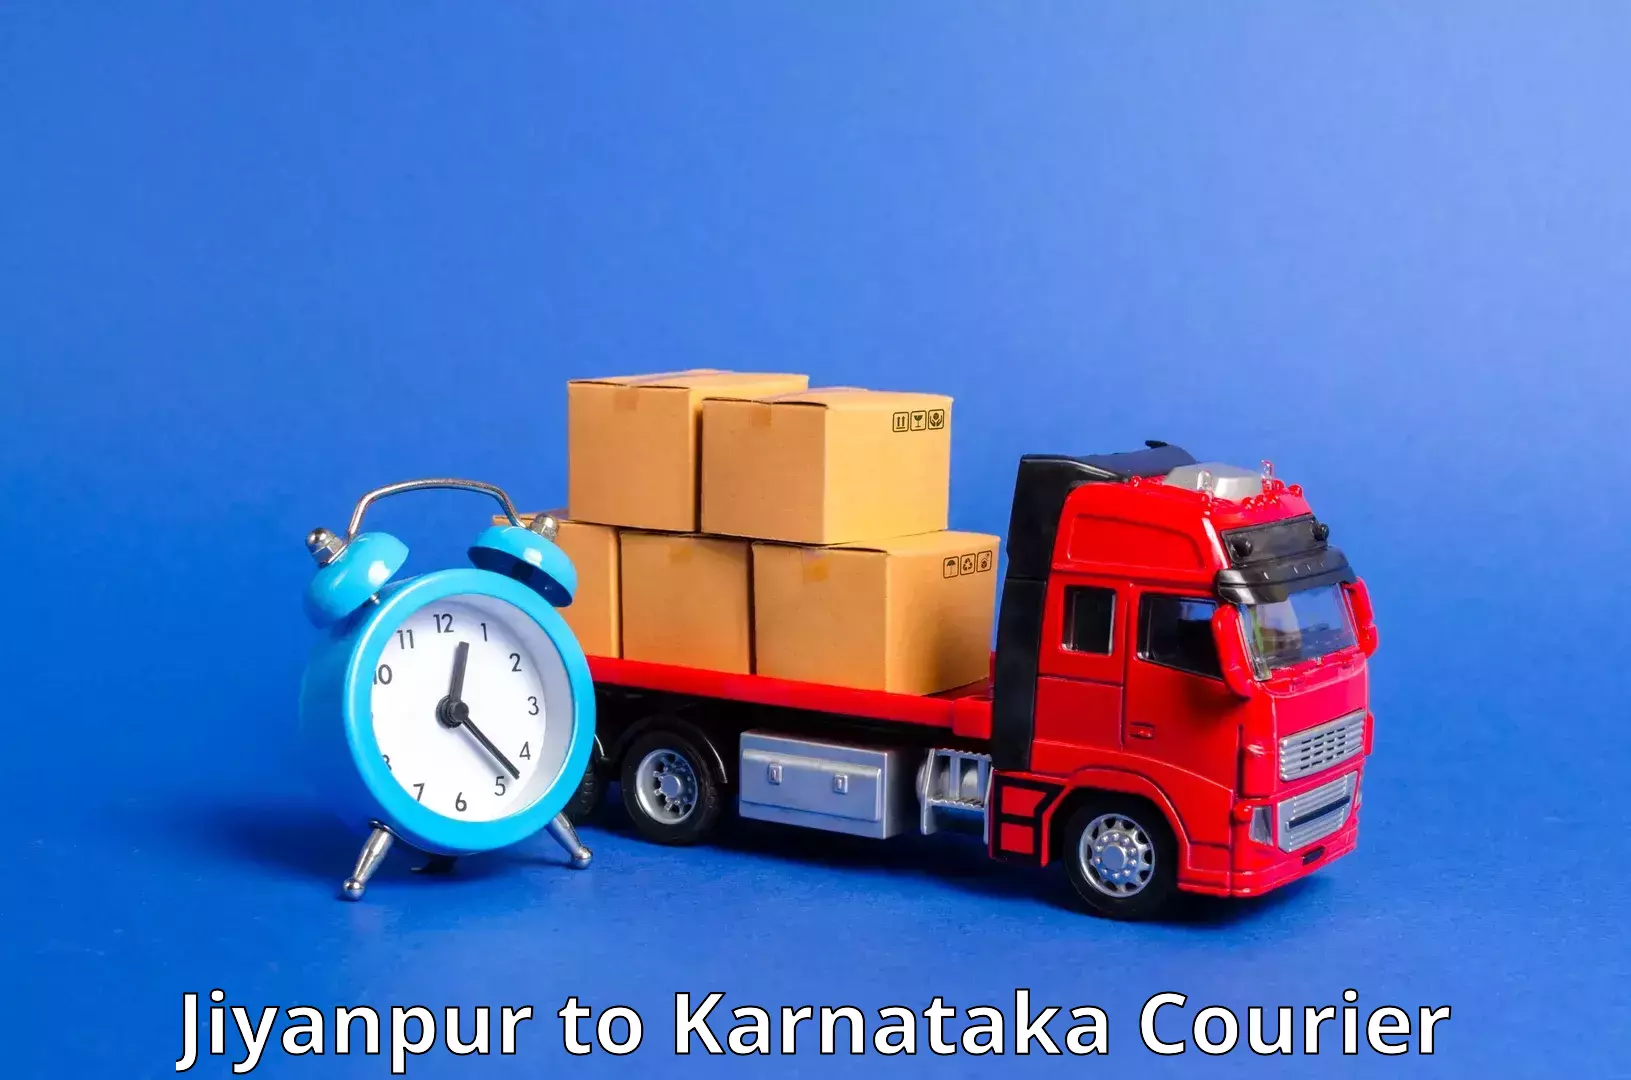 24-hour courier service Jiyanpur to Channapatna